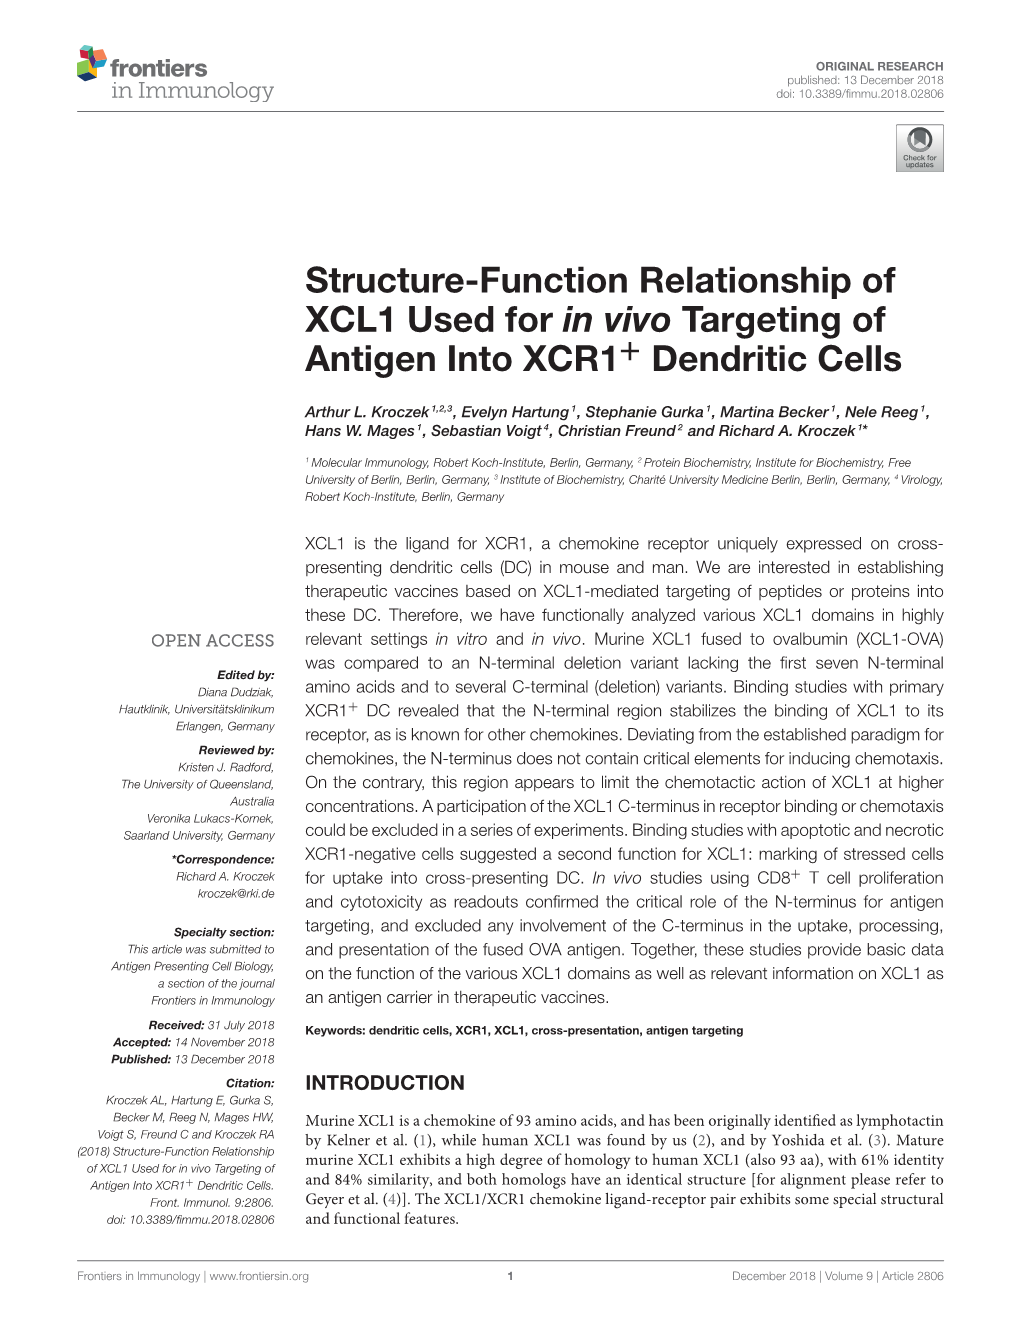 Structure-Function Relationship of XCL1 Used for in Vivo Targeting of Antigen Into XCR1+ Dendritic Cells